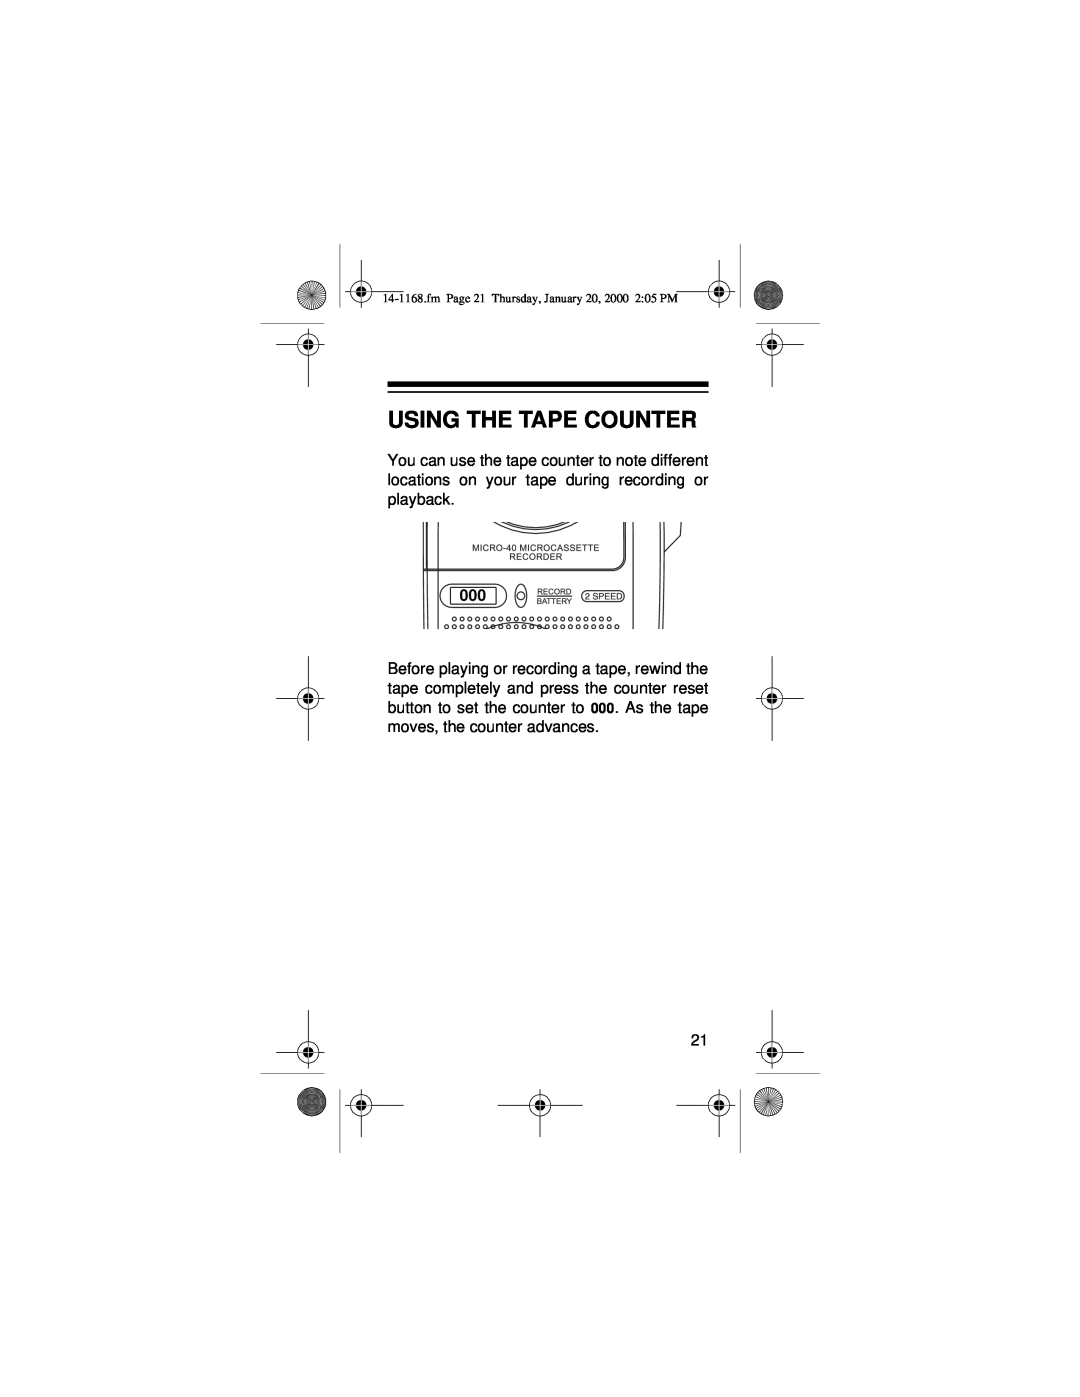 Optimus Micro-40, 14-1168 owner manual Using The Tape Counter, fm Page 21 Thursday, January 20, 2000 205 PM 